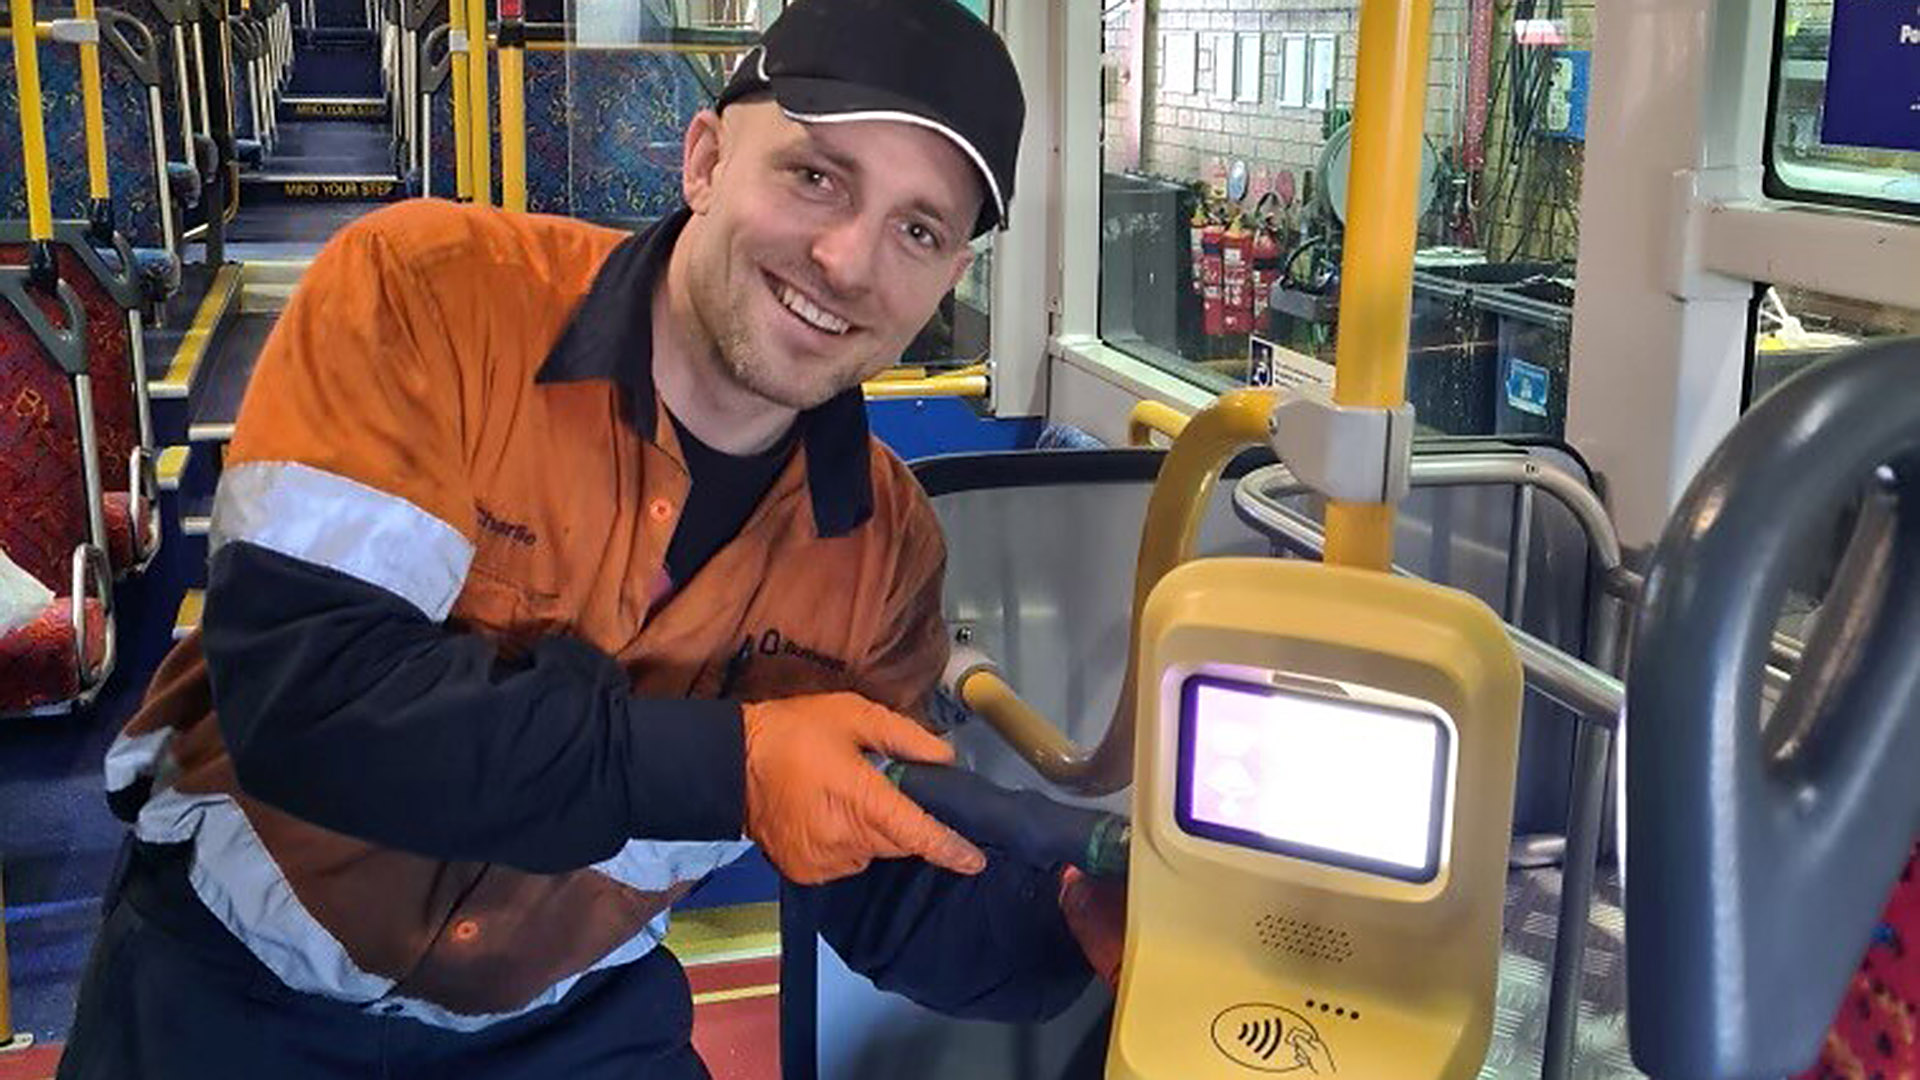 Busways employee shows off validator